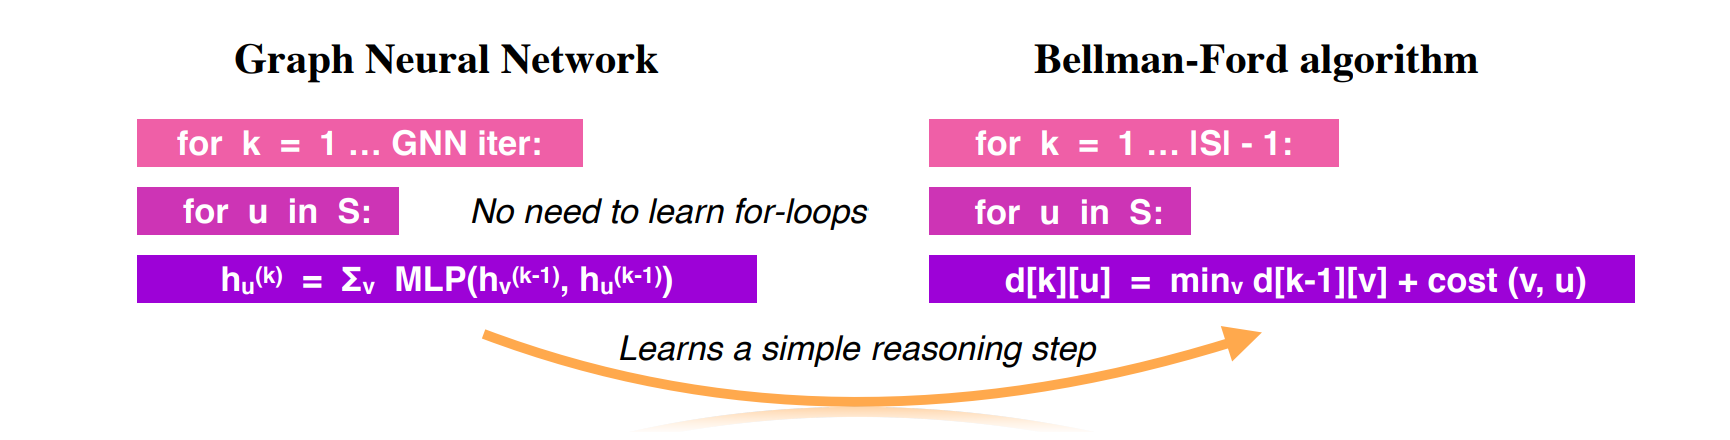 The framework [14] suggests that better algorithmic alignment
improves generalization. The computation structure of the GNN (left)
aligns well with the Bellman-Ford algorithm (right). GNN can simulate
Bellman-Ford by merely learning a simple reasoning step.